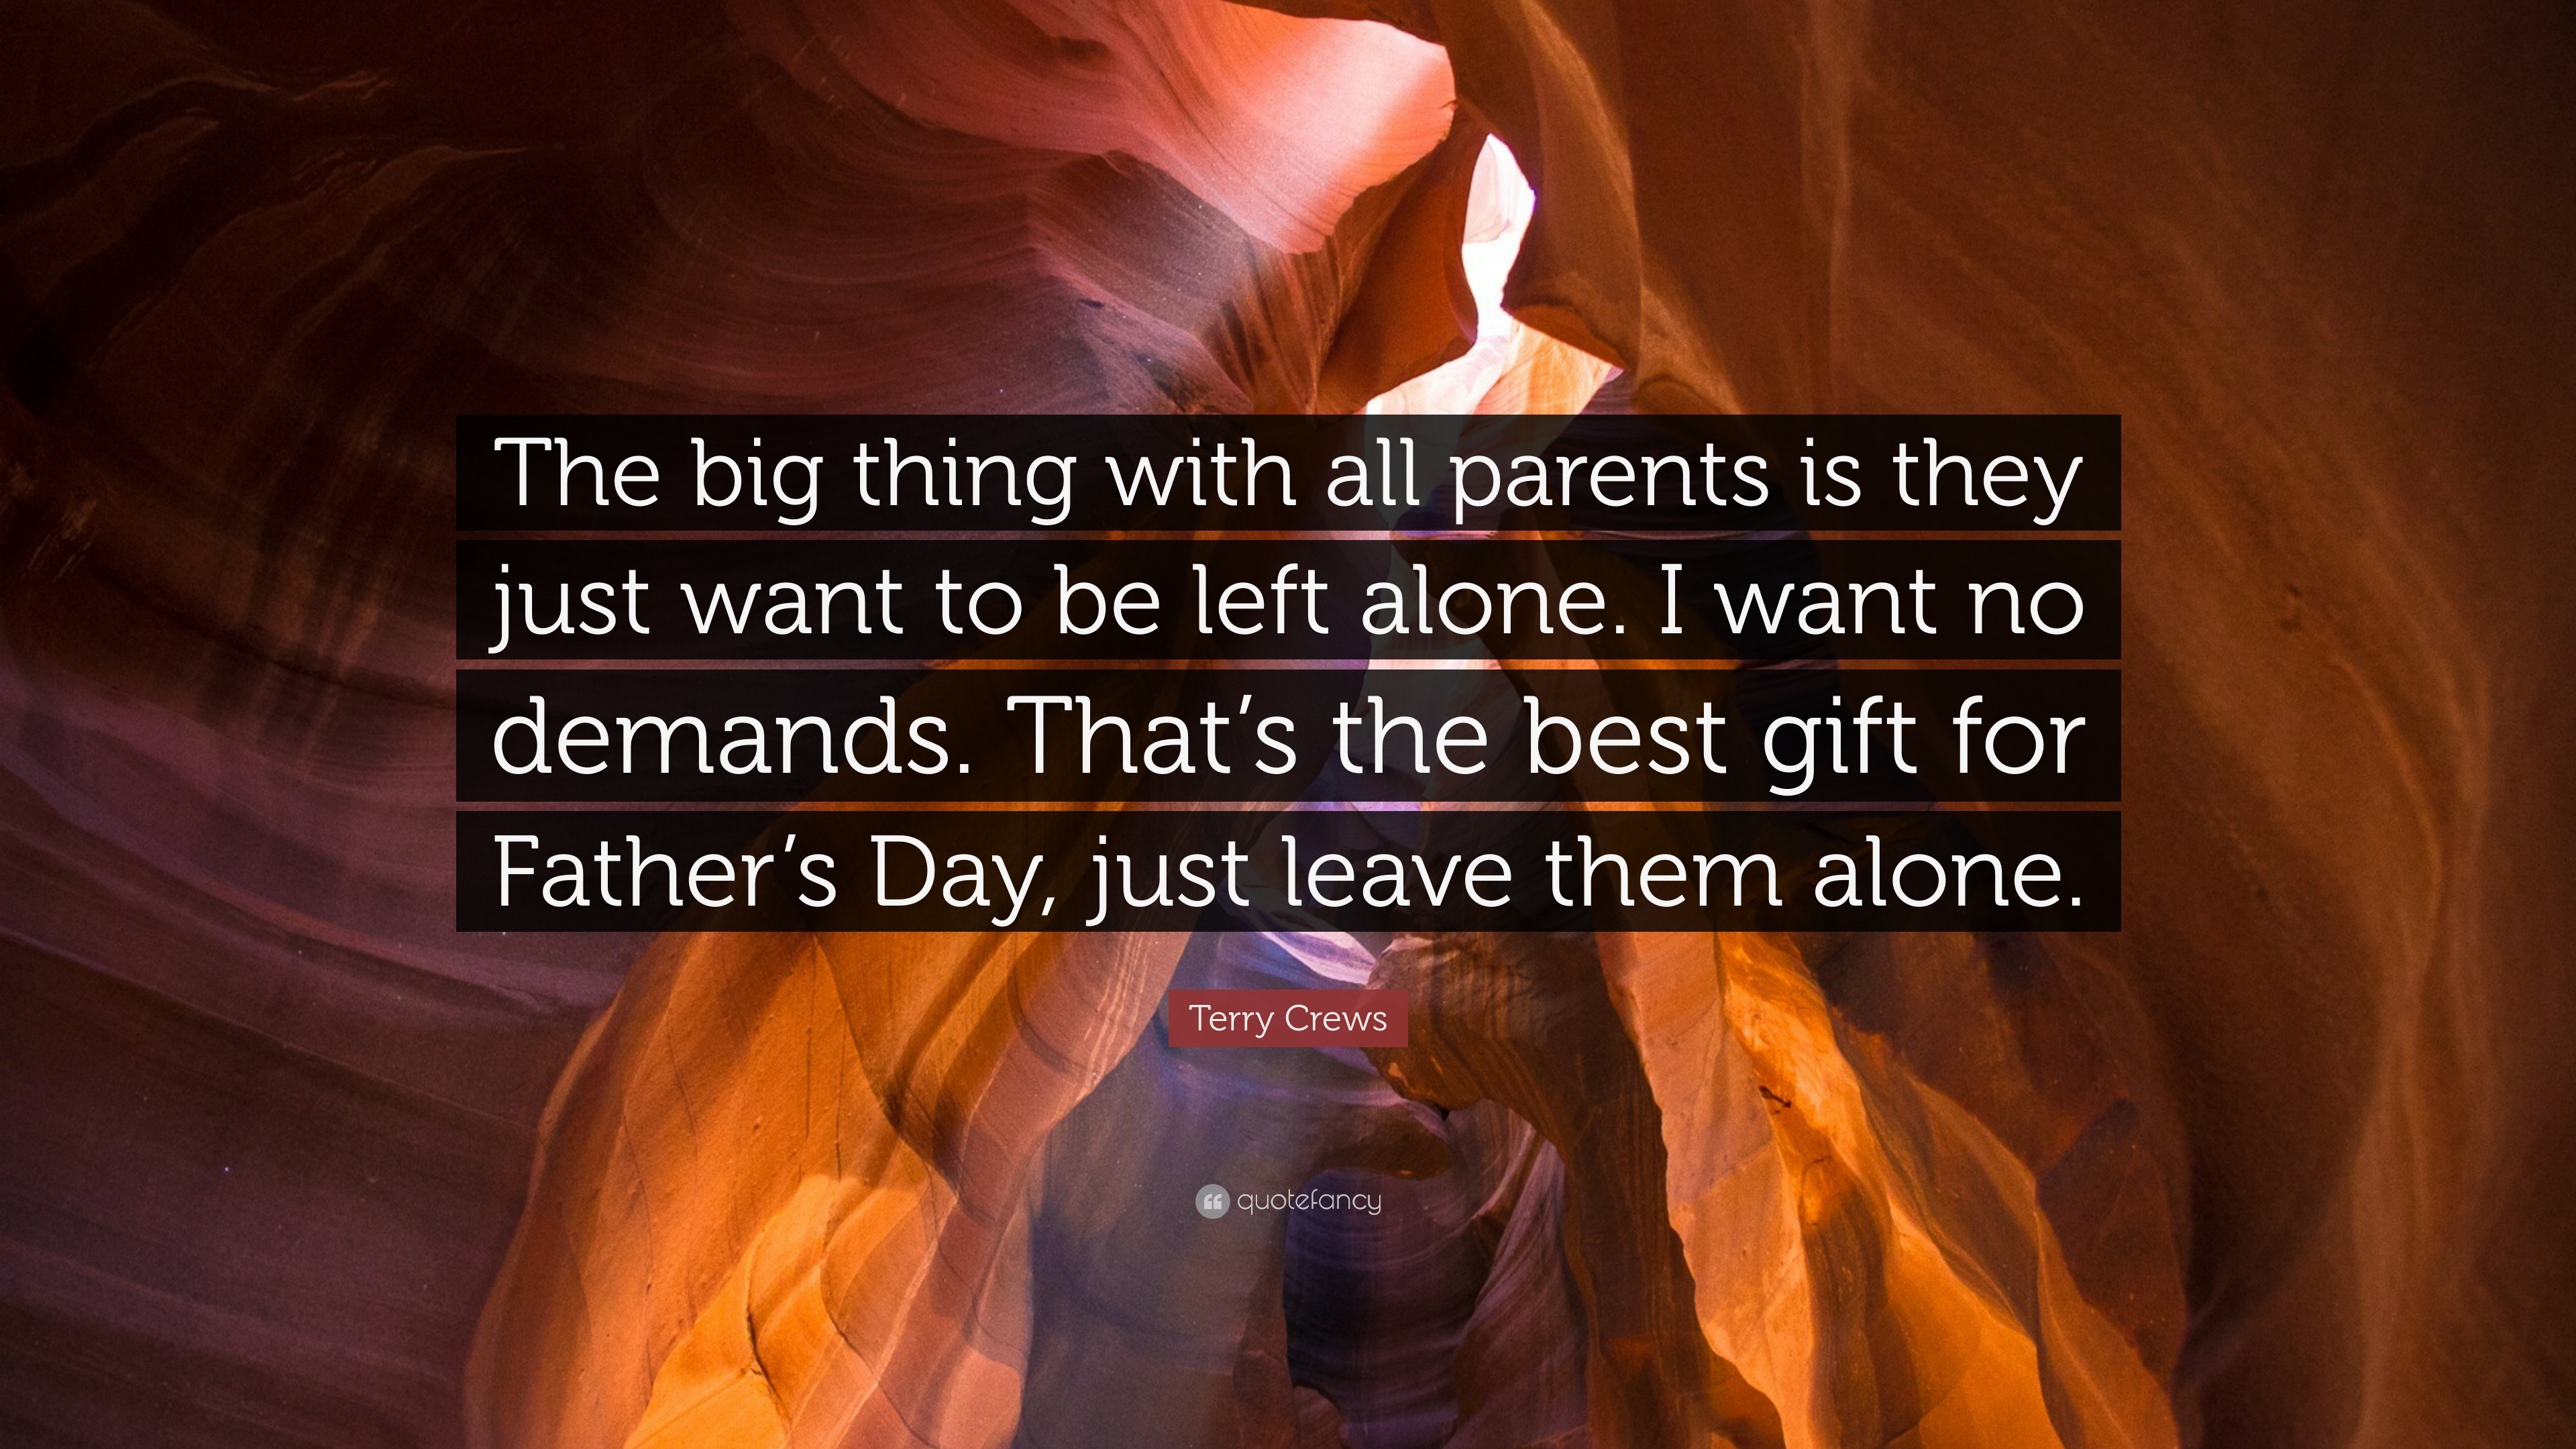 26 Heartfelt Marriage Quotes and Quotes About Raising a Family